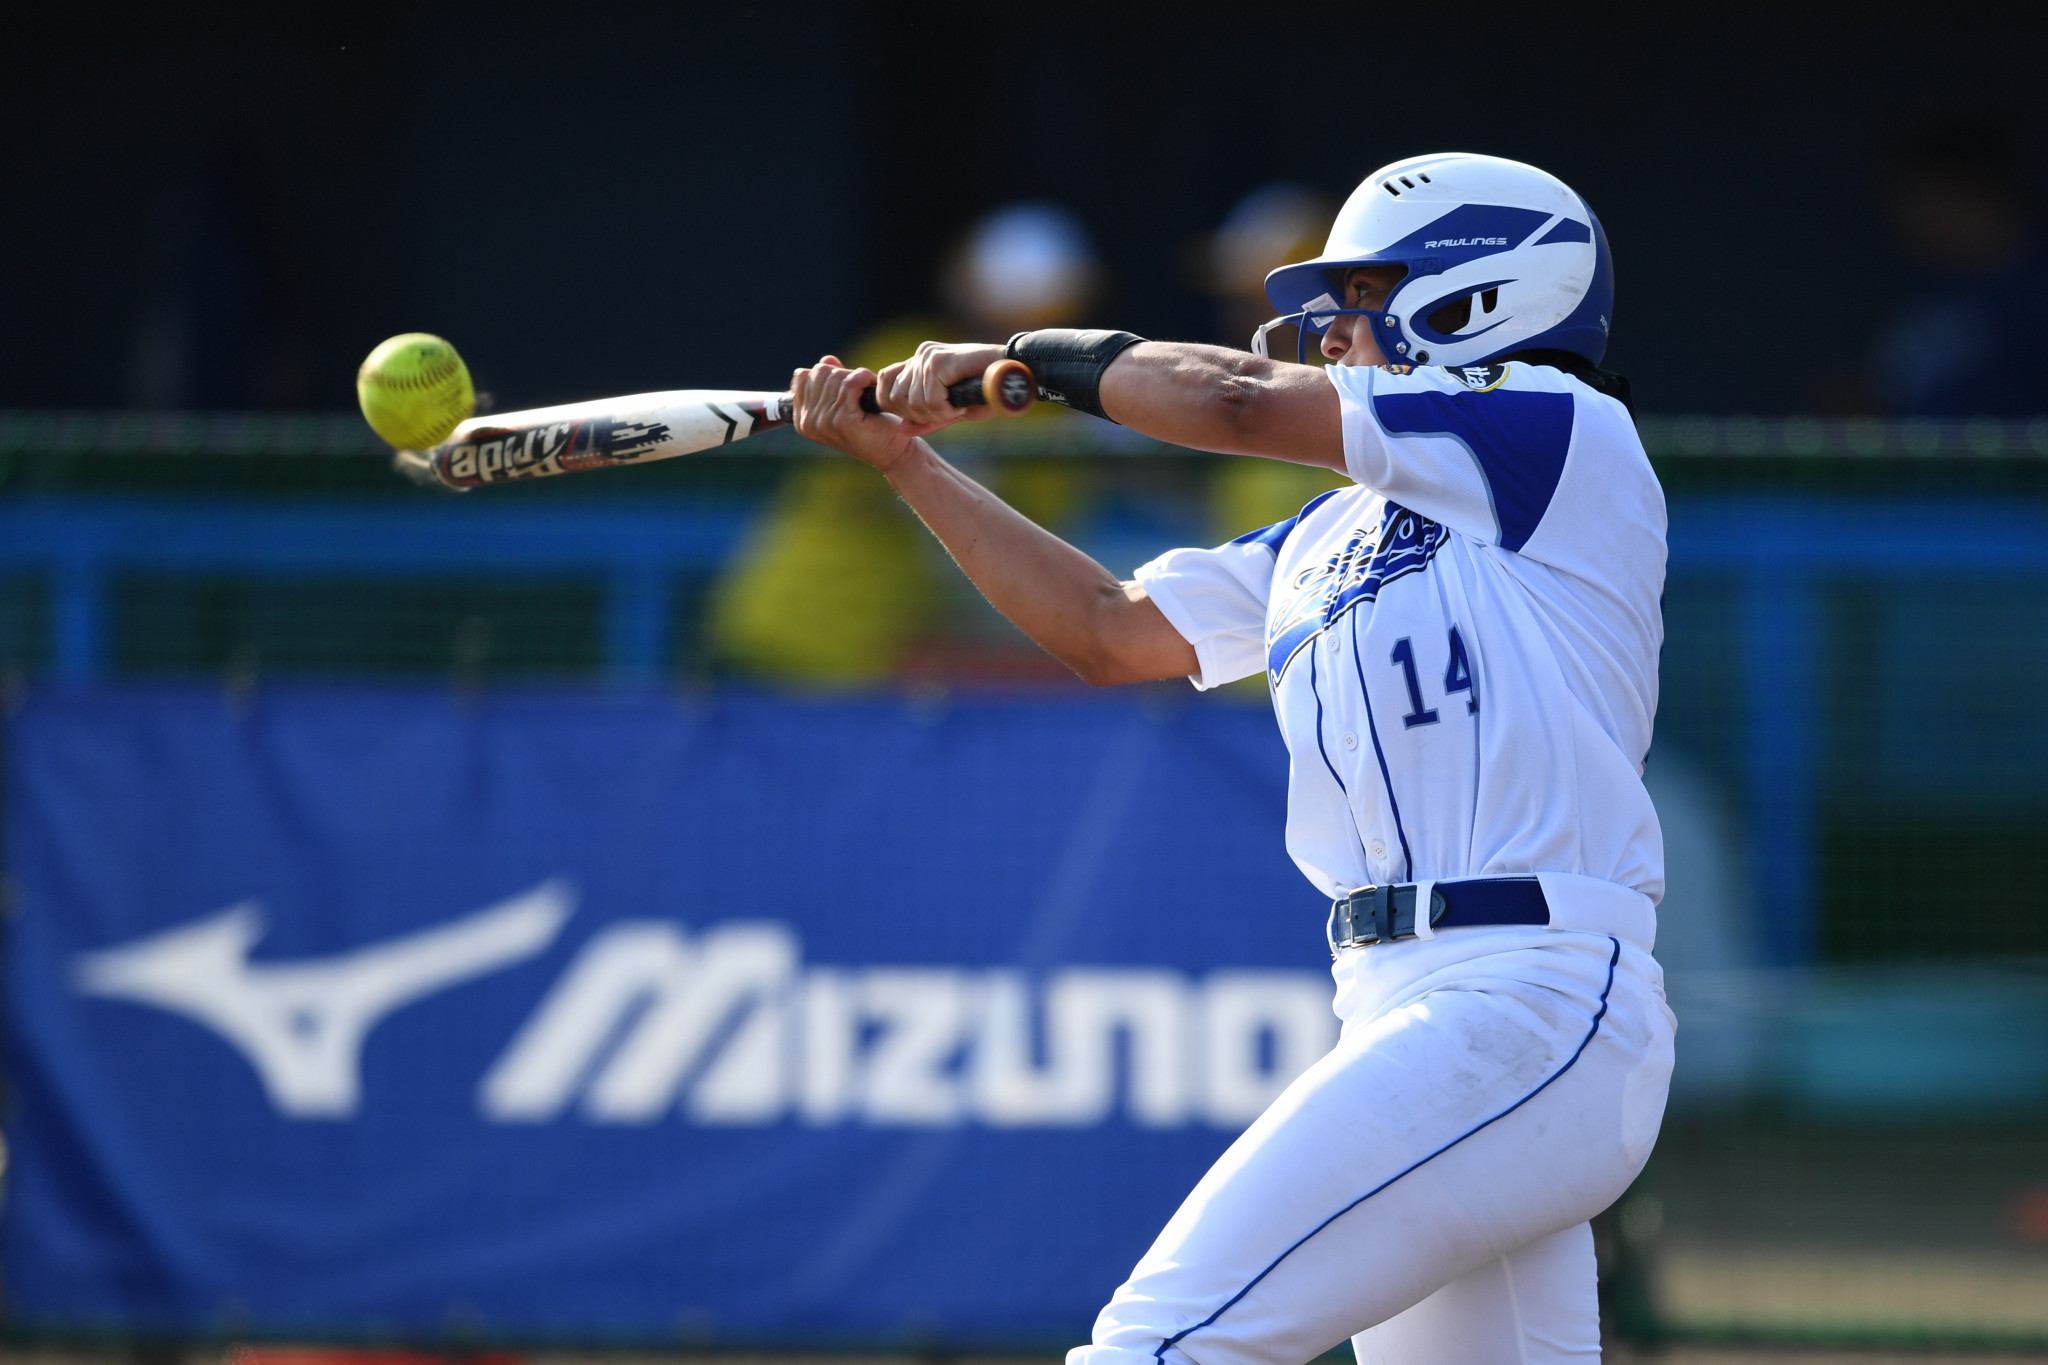 Softball Europe is pressing ahead with the rest of its 2021 competitions ©Getty Images